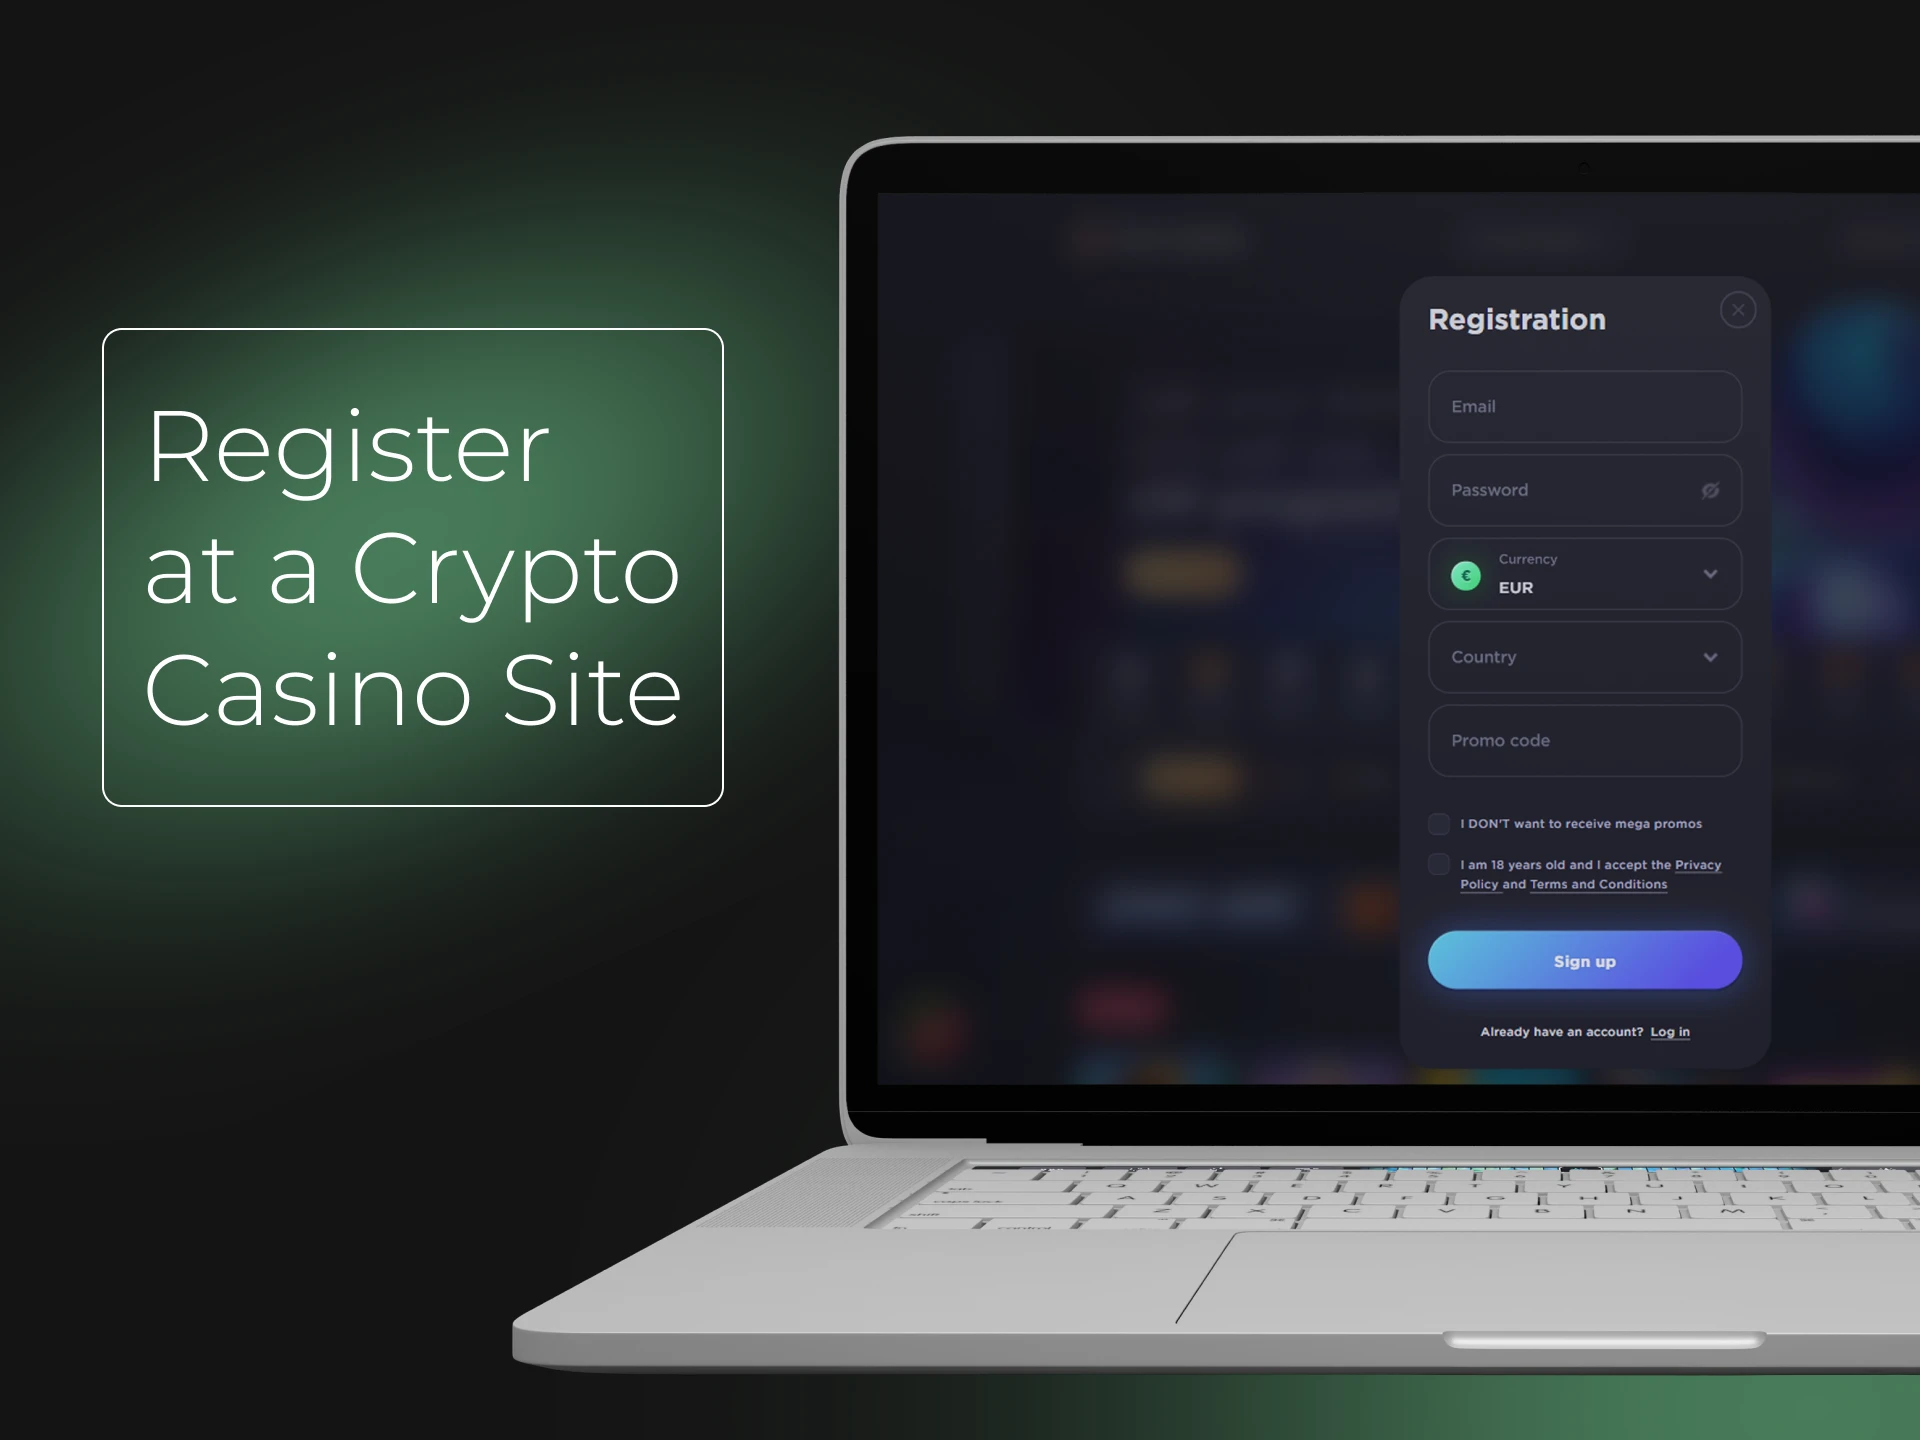 To play in crypto casinos, register.